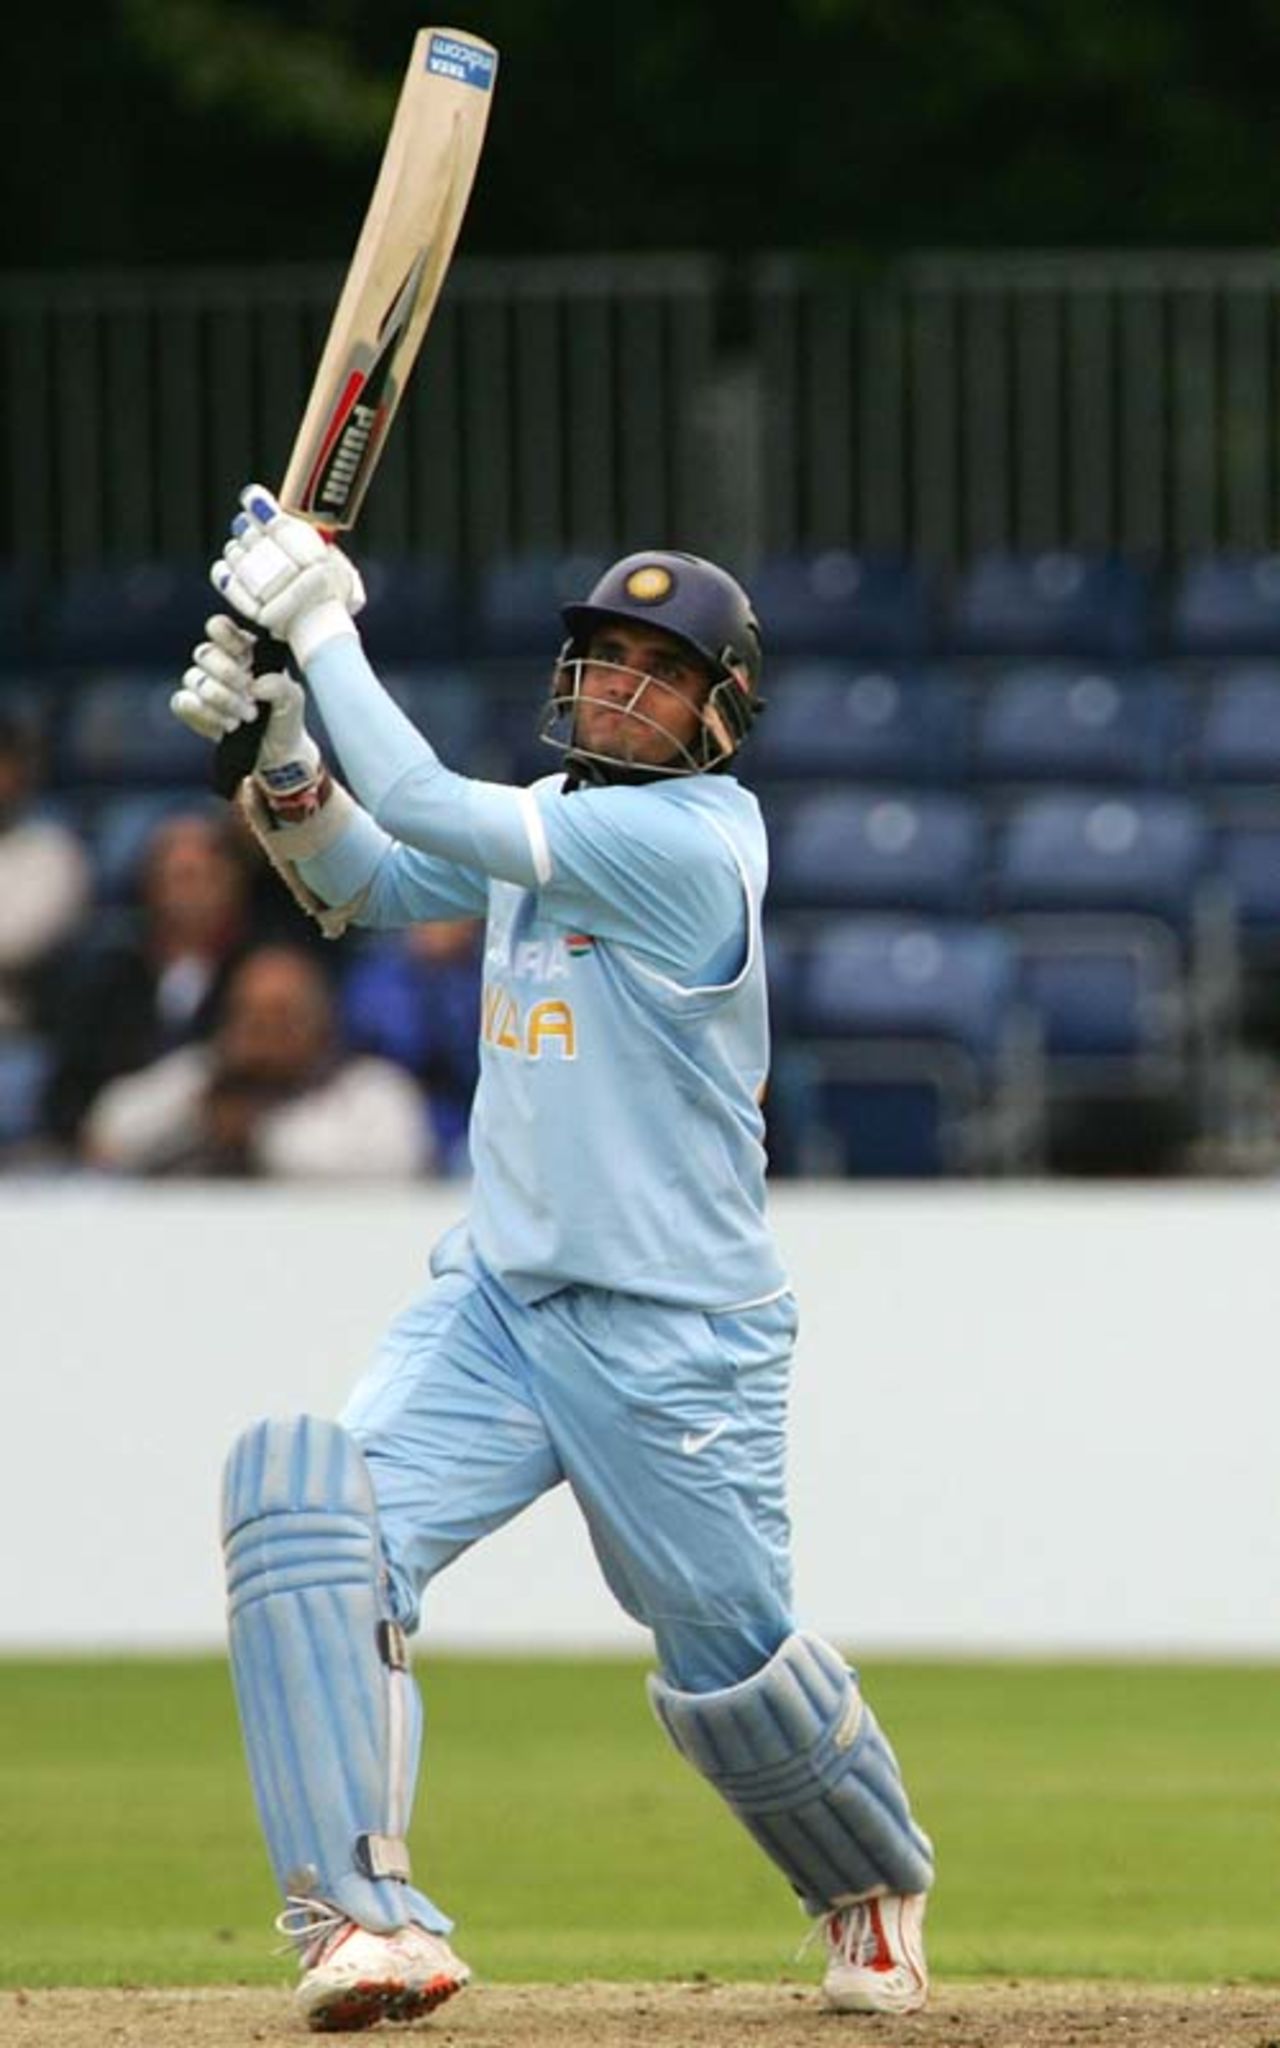 Sourav Ganguly launches into a lofted shot, Ireland v India, one-off ODI, Belfast, June 23, 2007